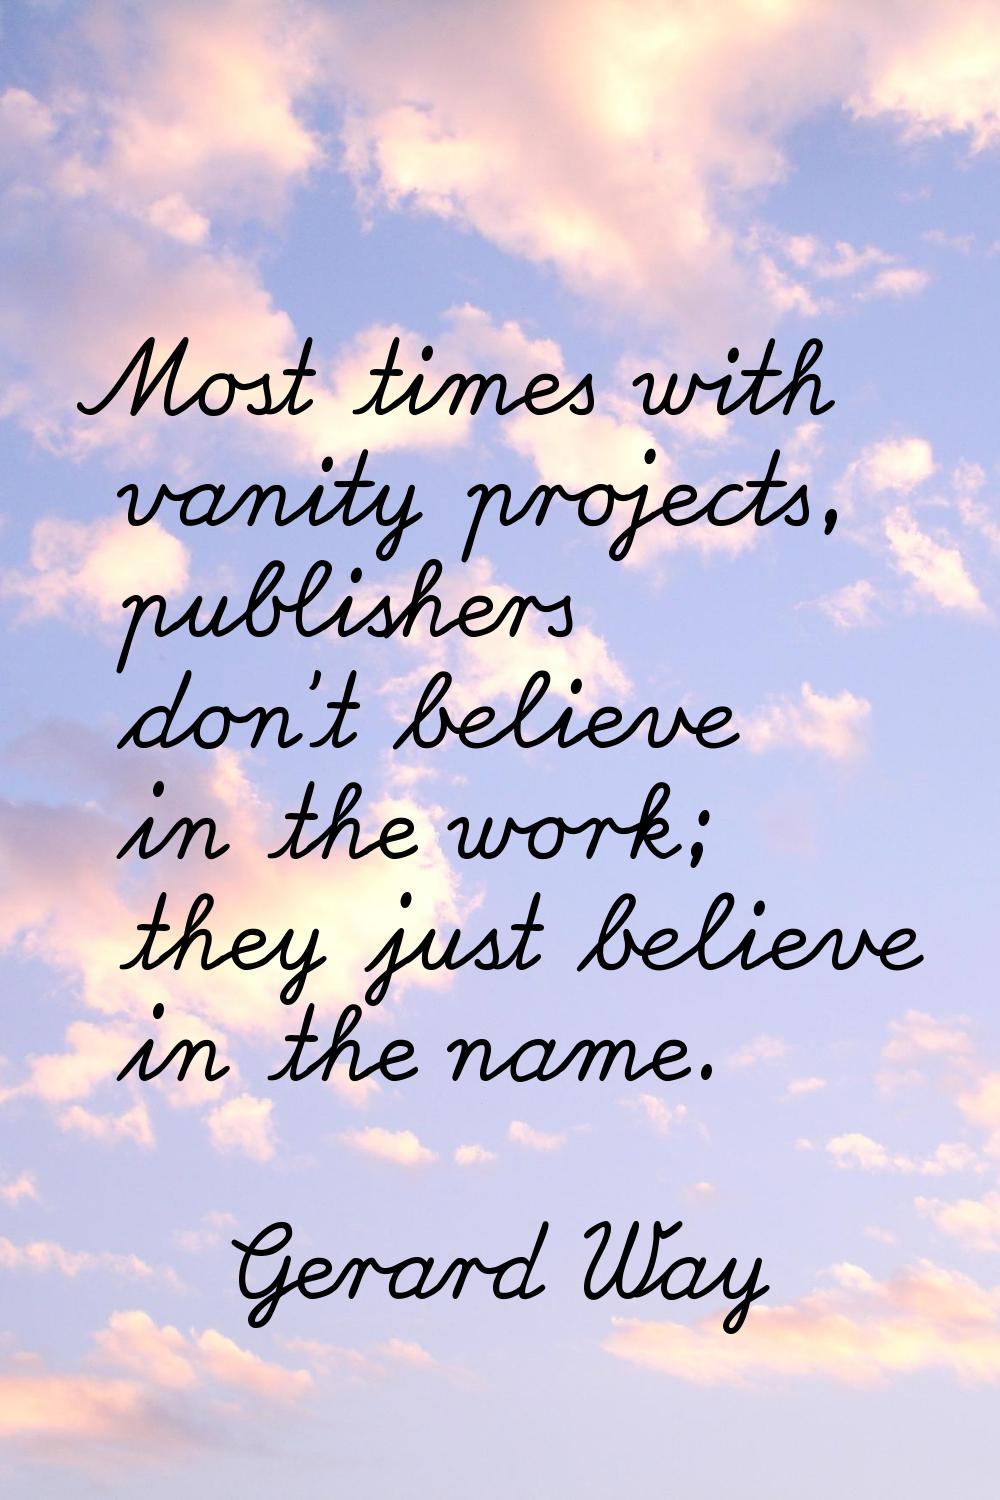 Most times with vanity projects, publishers don't believe in the work; they just believe in the nam